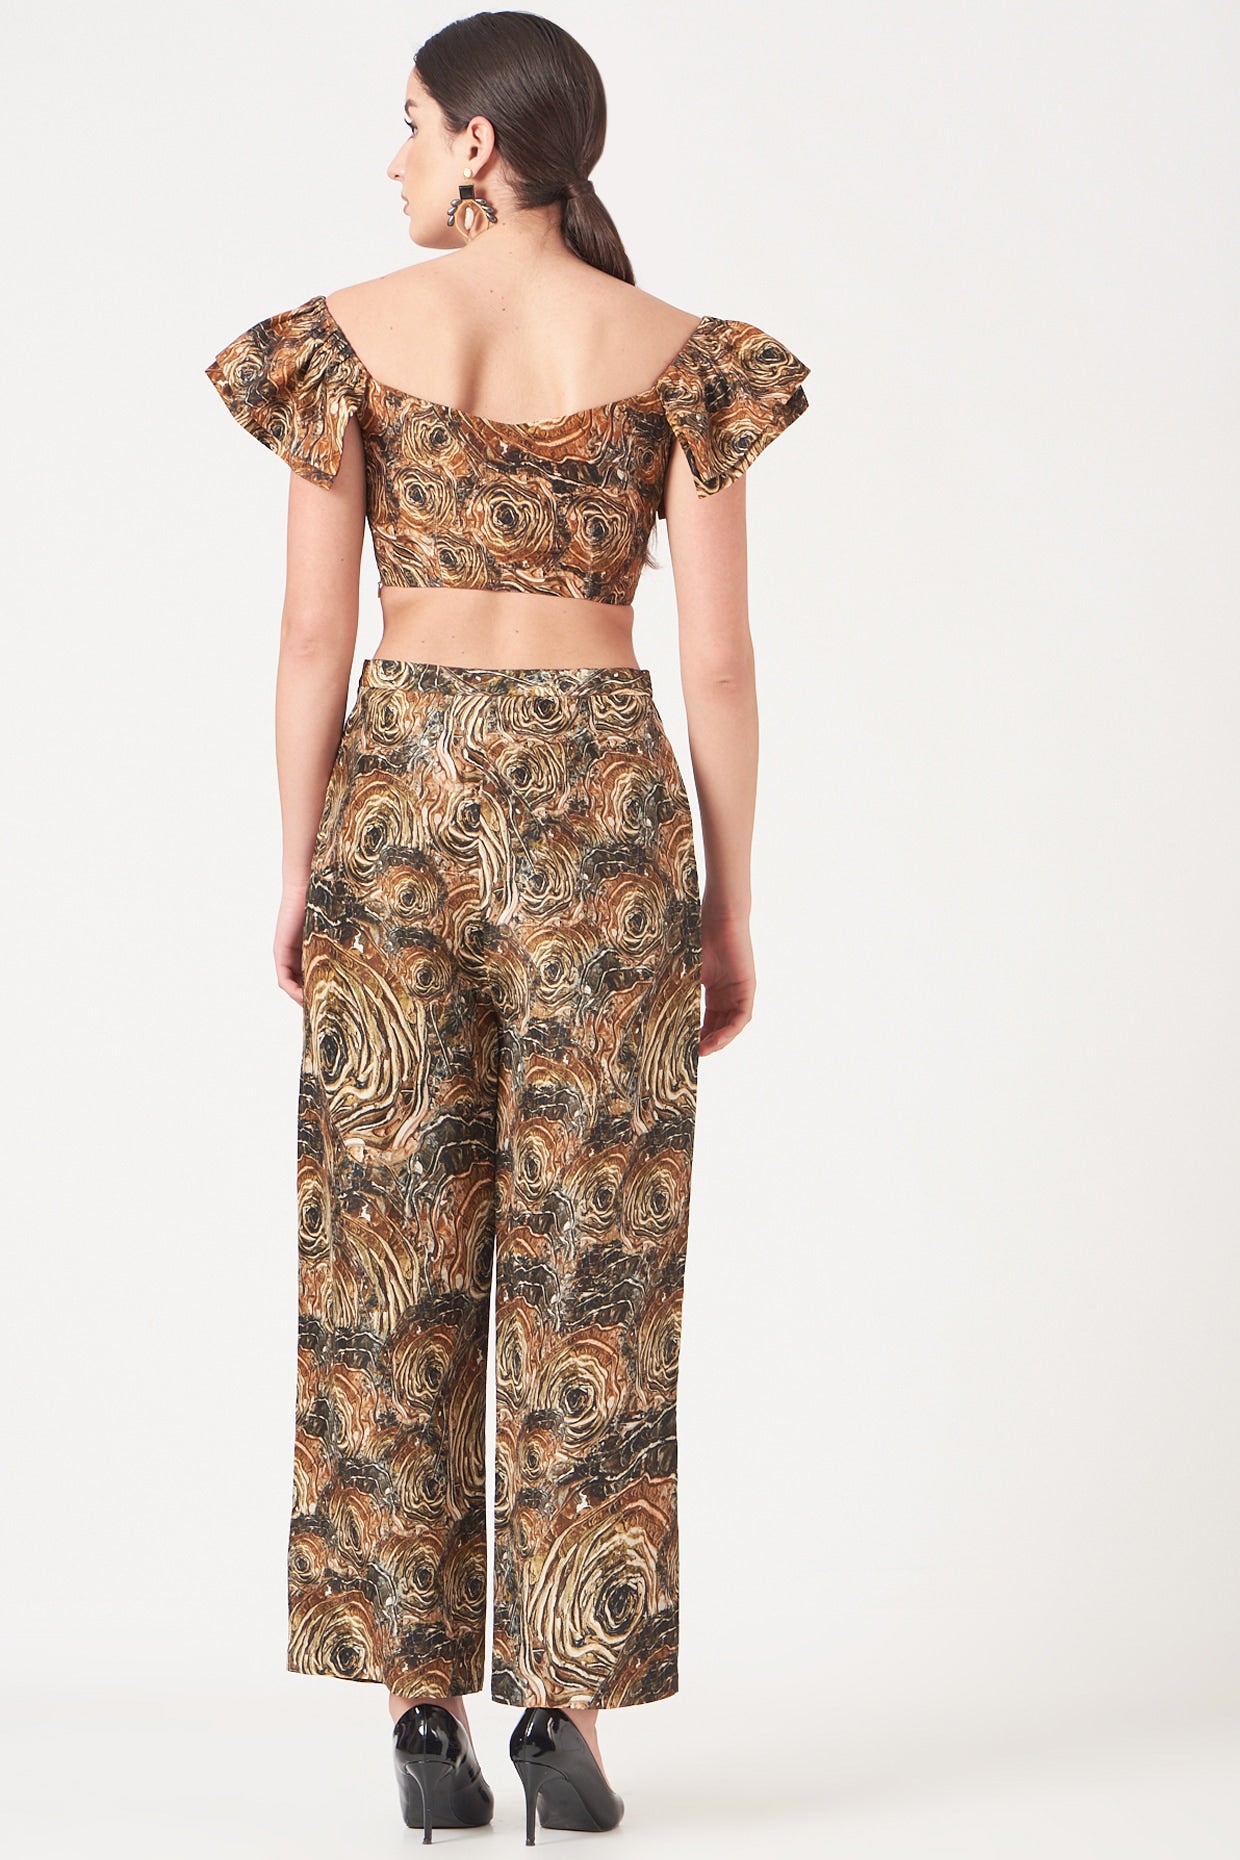 Brown And Gold Blackhole Print Crop Top And Pants Coord Set